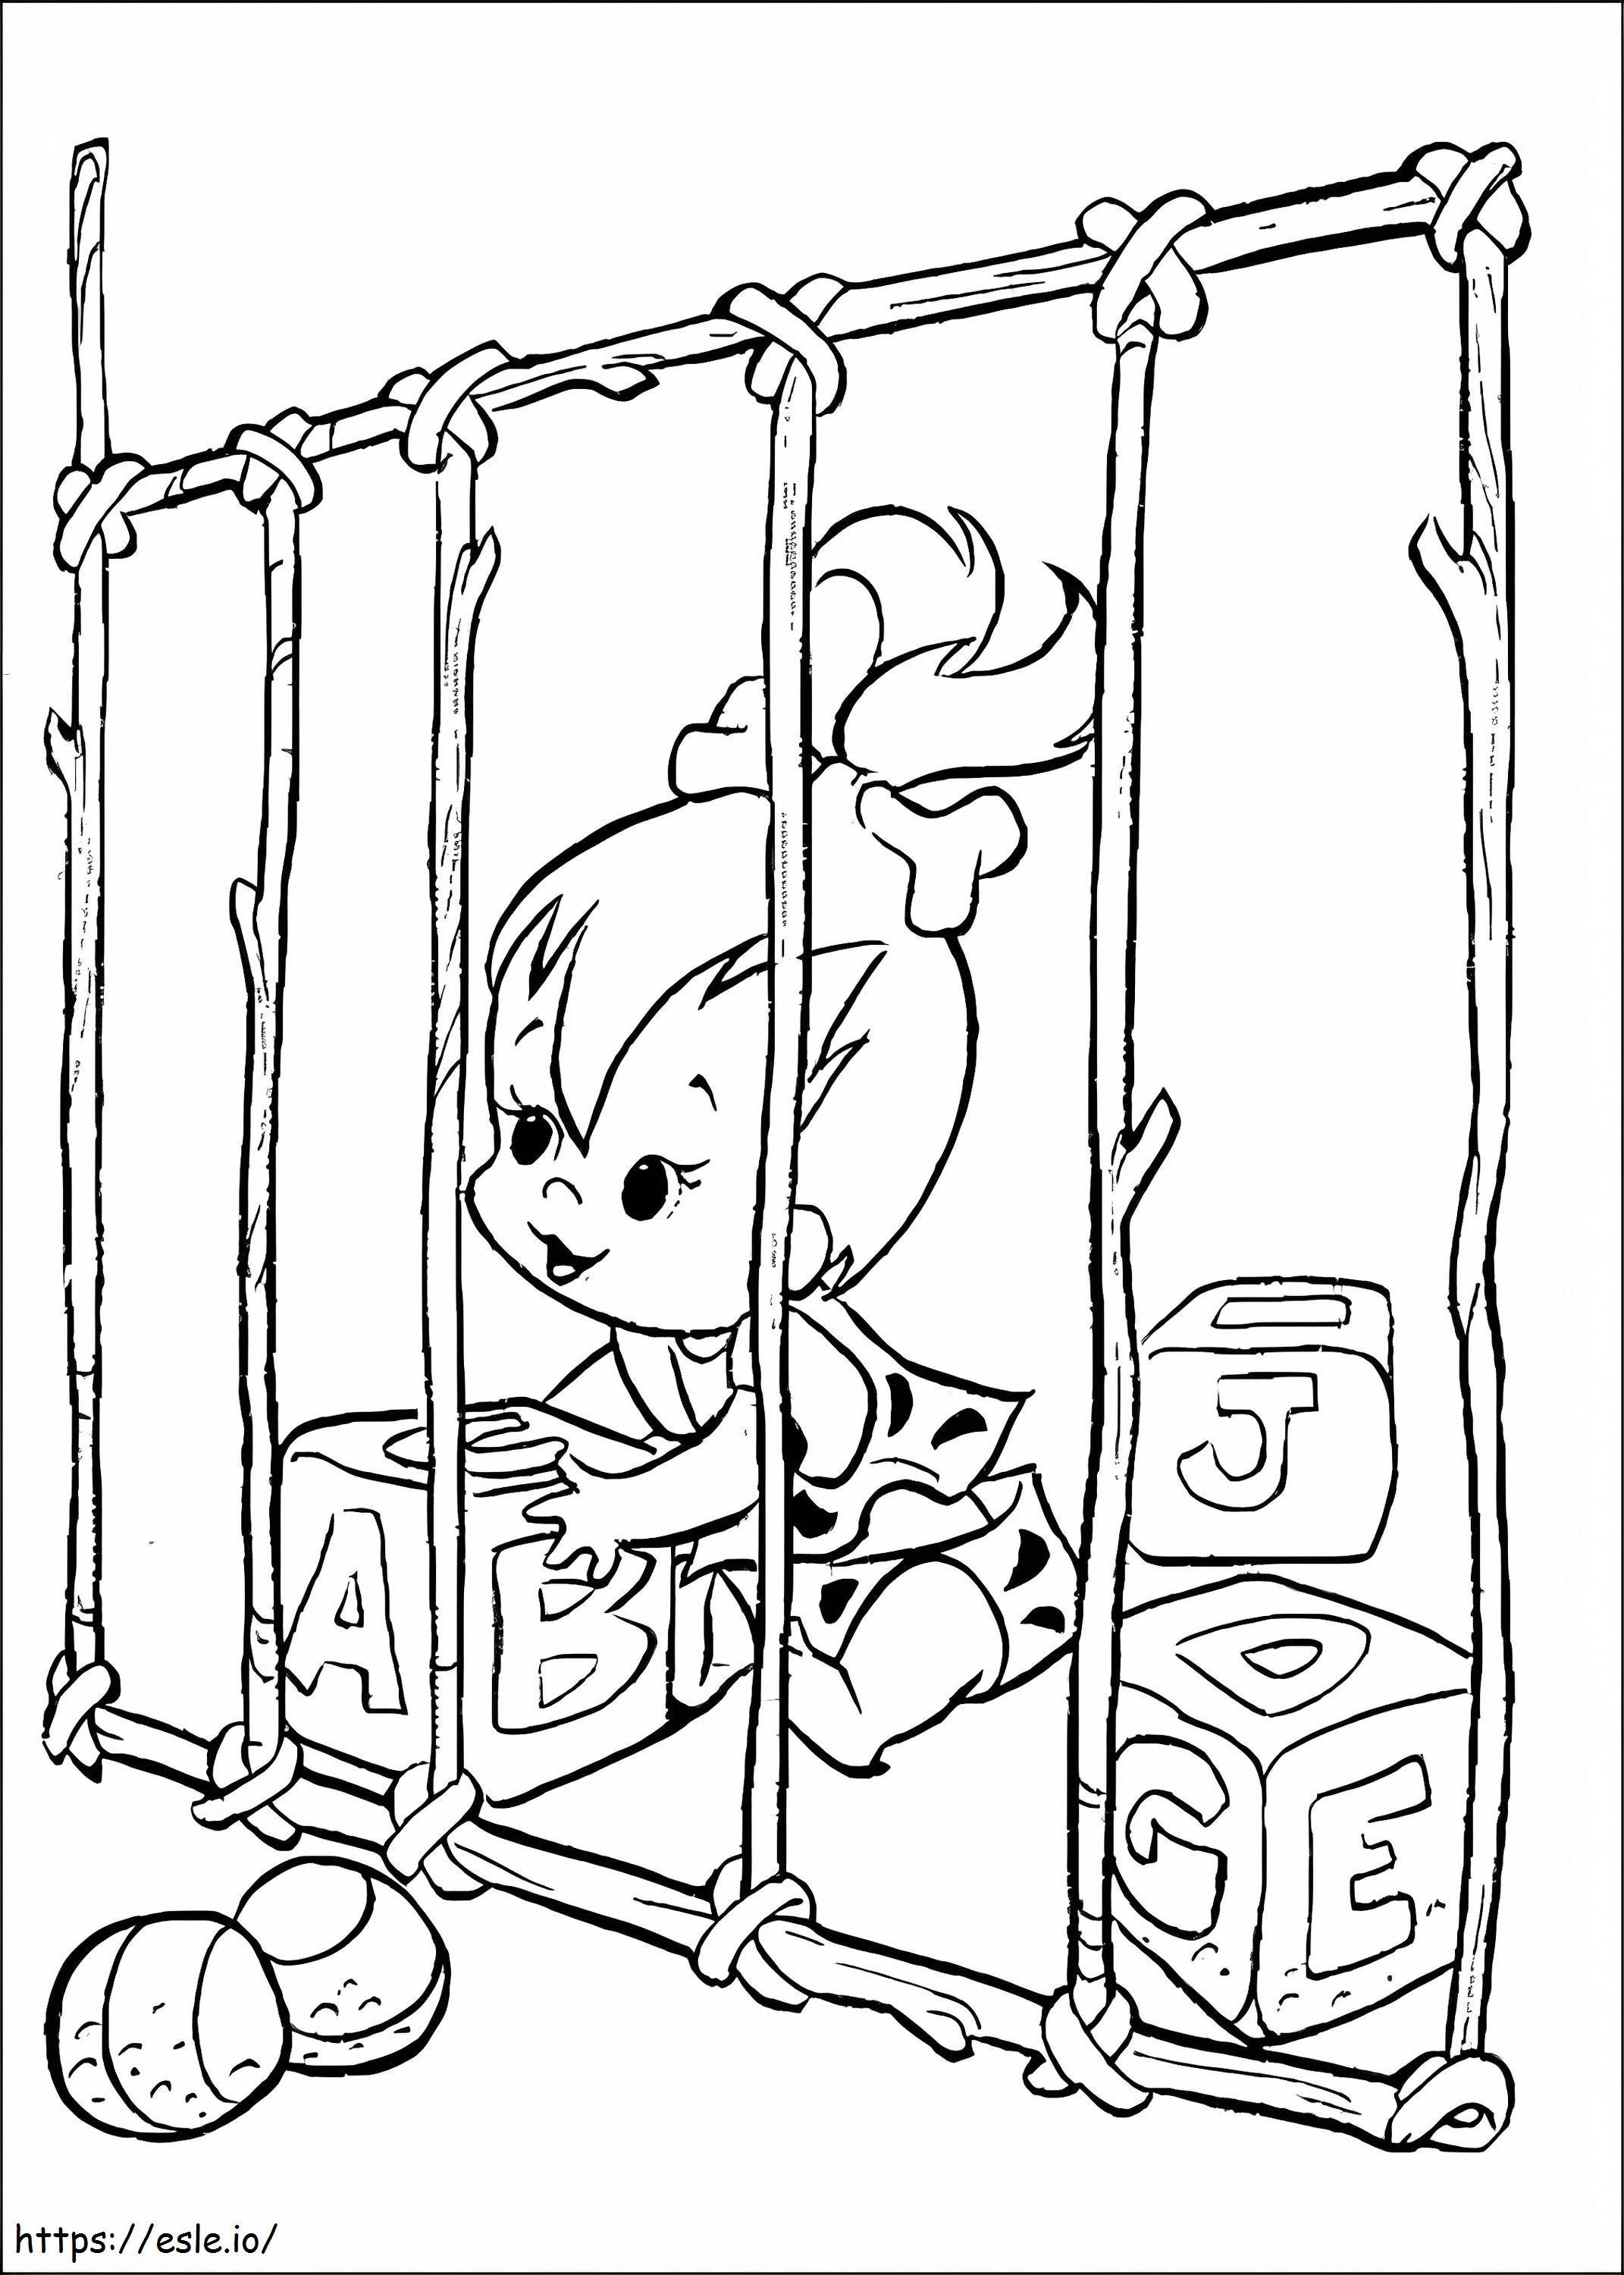 Pebbles From The Flintstones coloring page